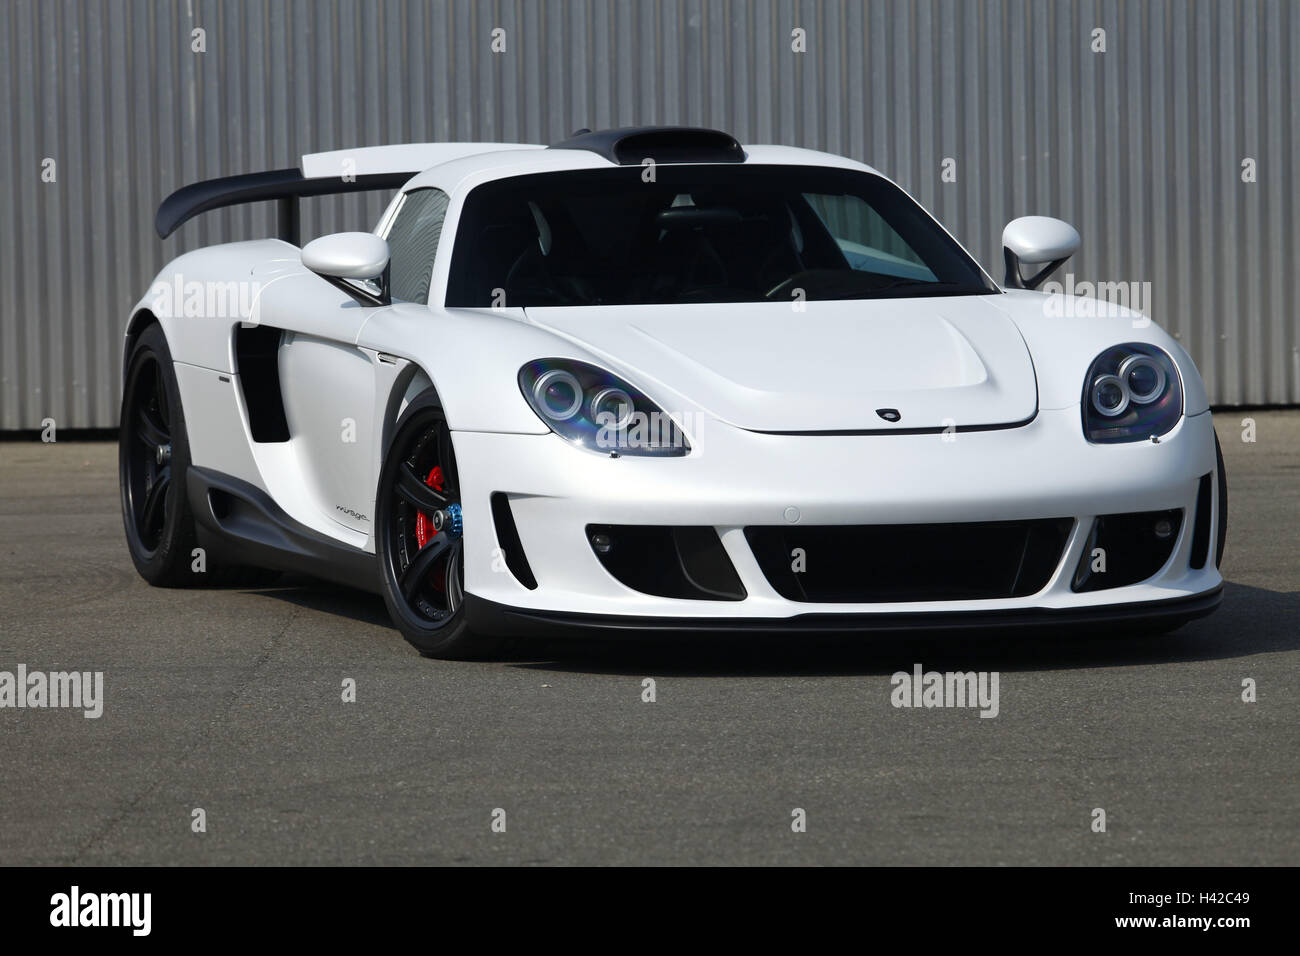 Porsche, Gemballa Mirage GT white, aslant from the front, no property release, Stock Photo